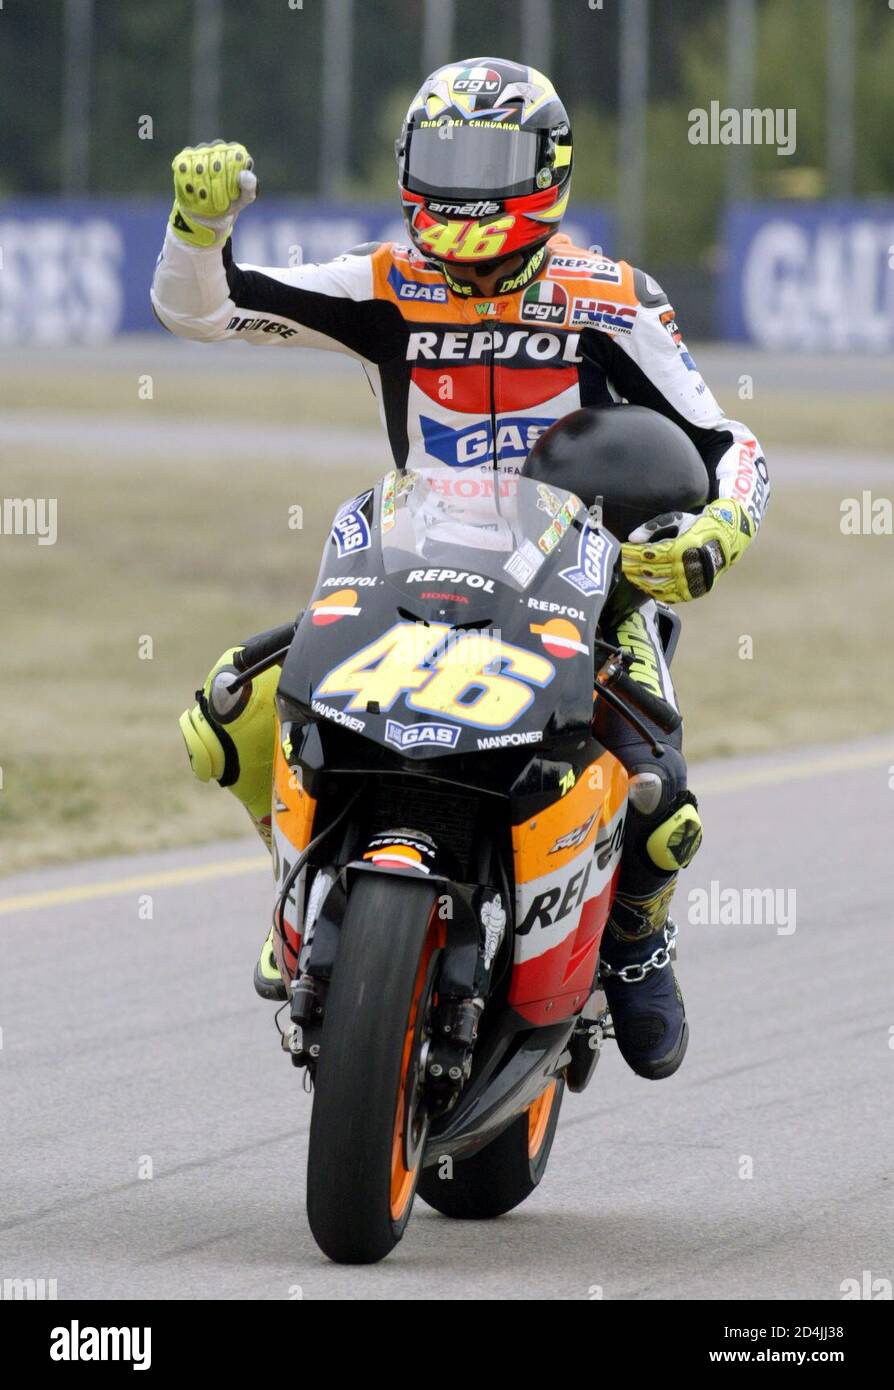 Valentino Rossi of Italy celebrates his victory of the MotoGP motorcycling  race of the Czech Republic Grand Prix in Brno August 17, 2003. Rossi won  today clocking the time of 44 minutes